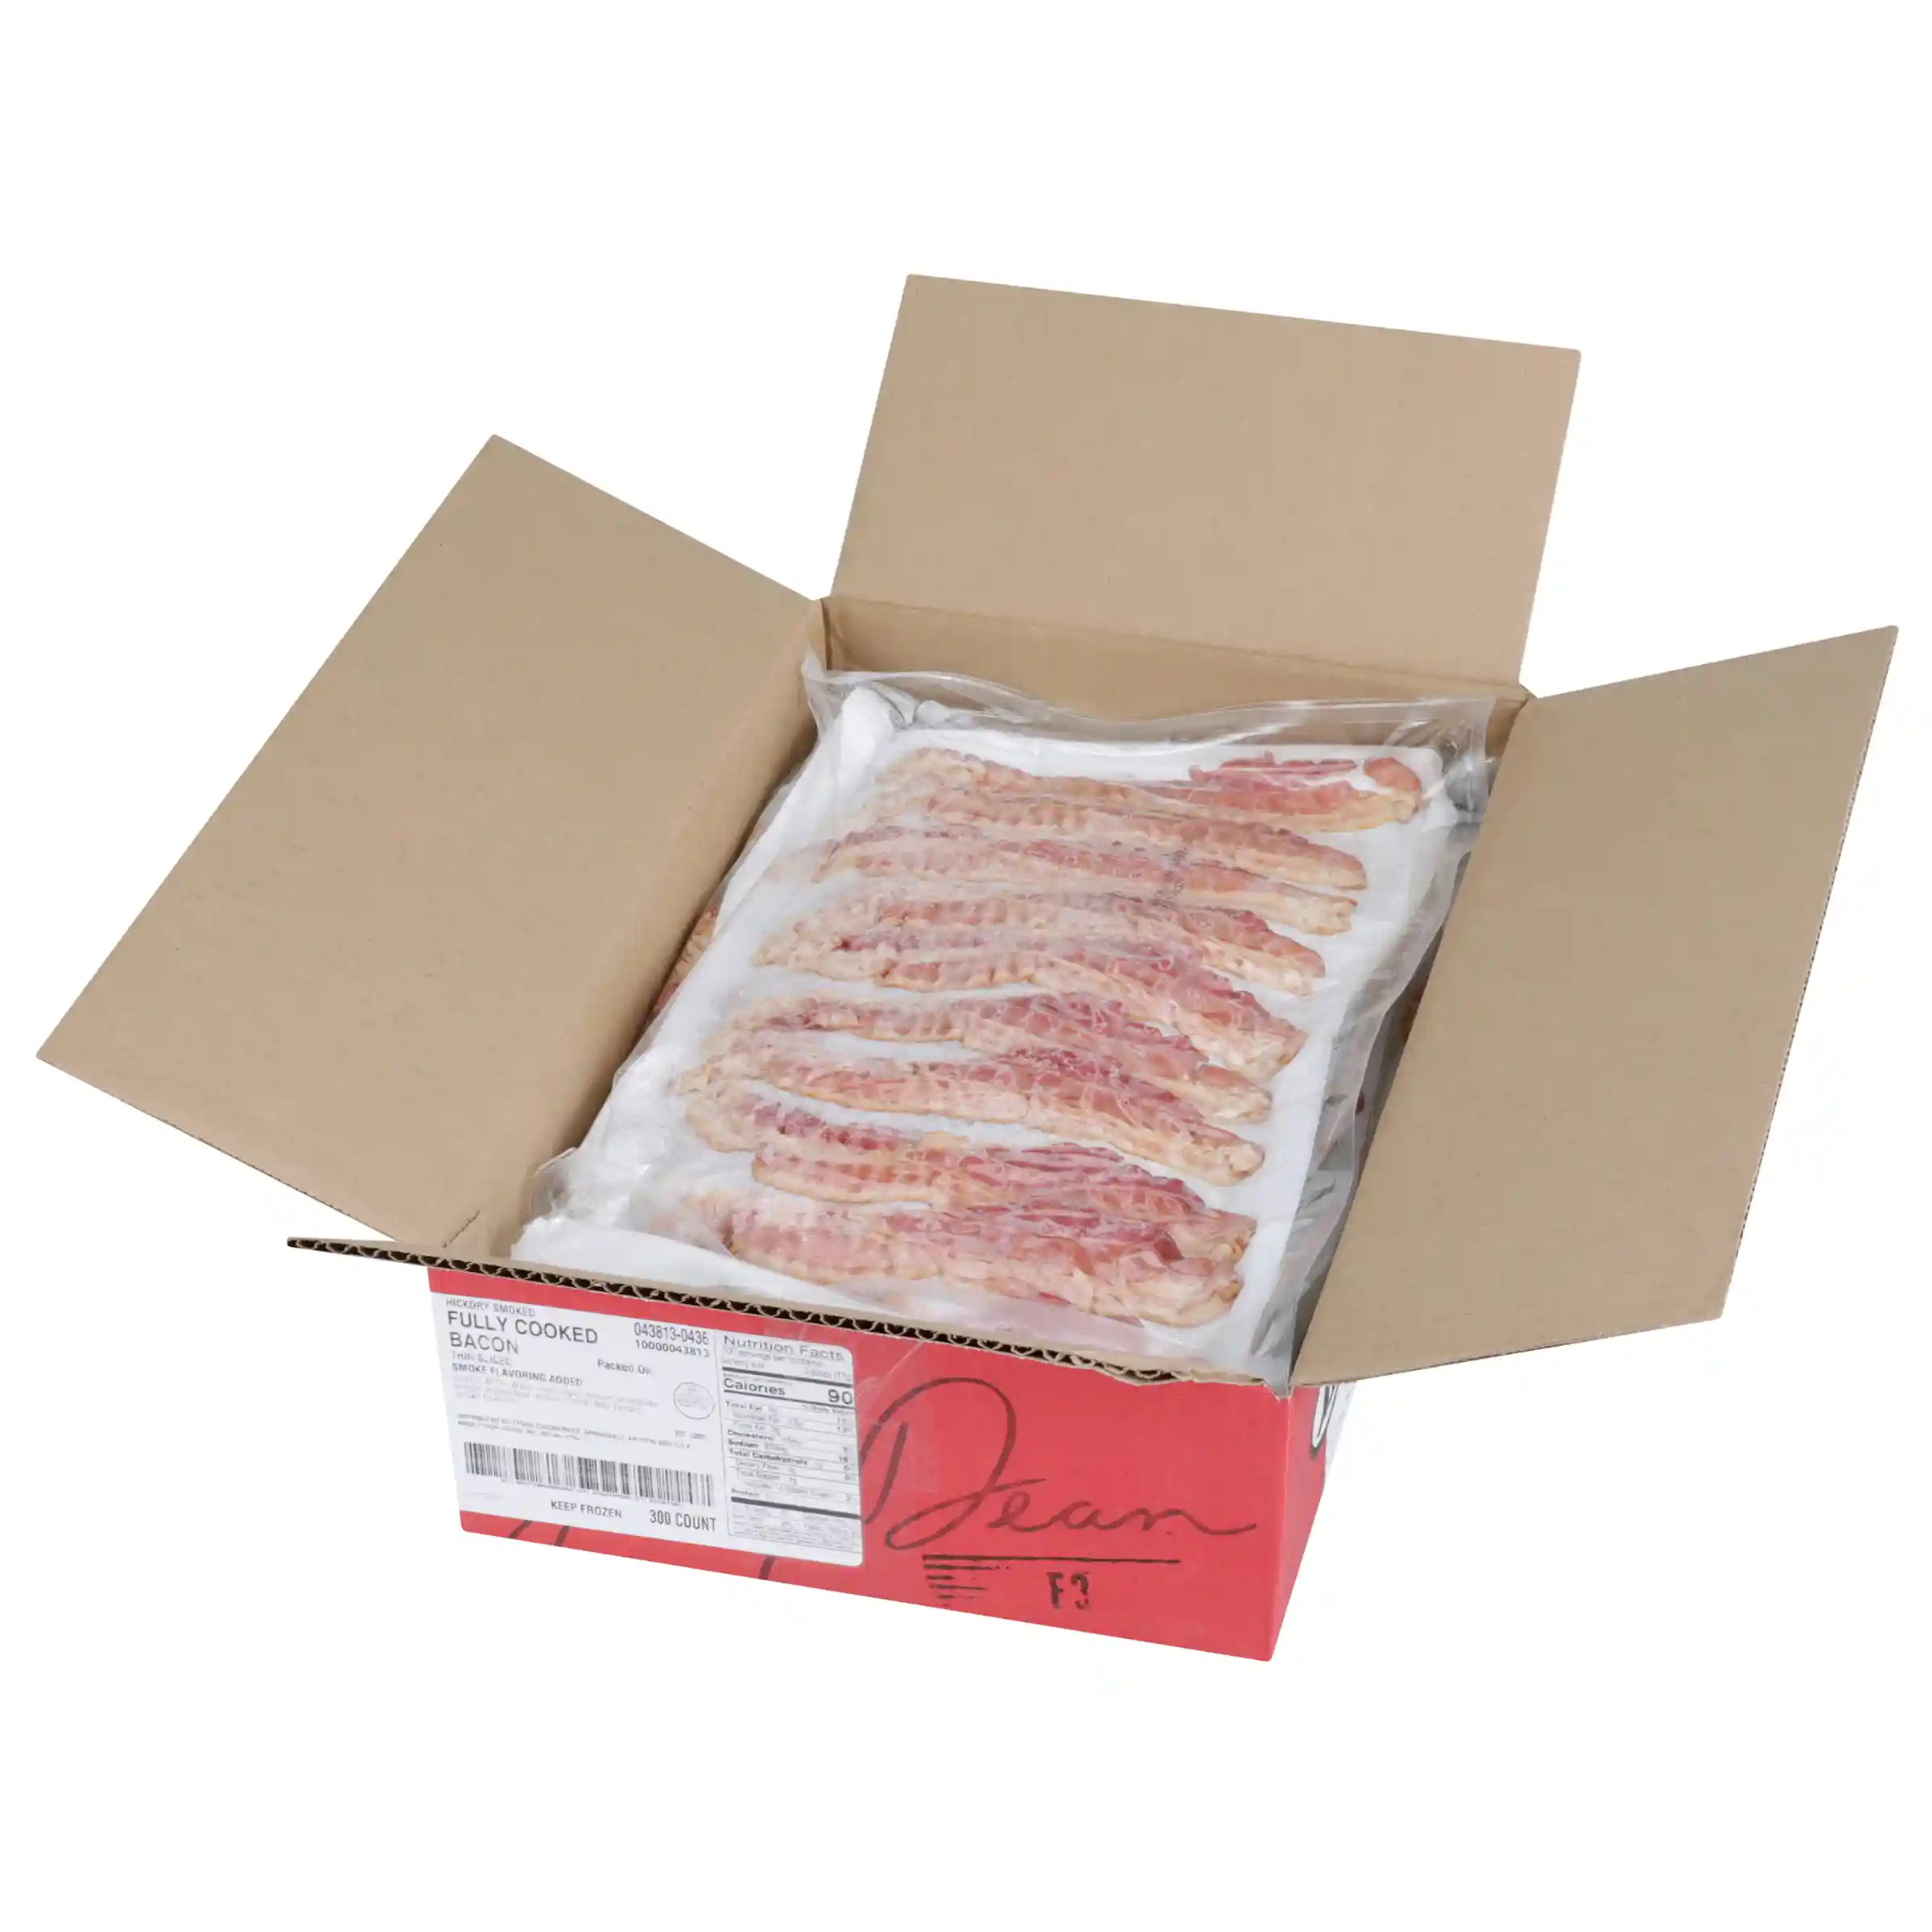 Jimmy Dean® Fully Cooked Hickory Smoked Thin Bacon Slices_image_31